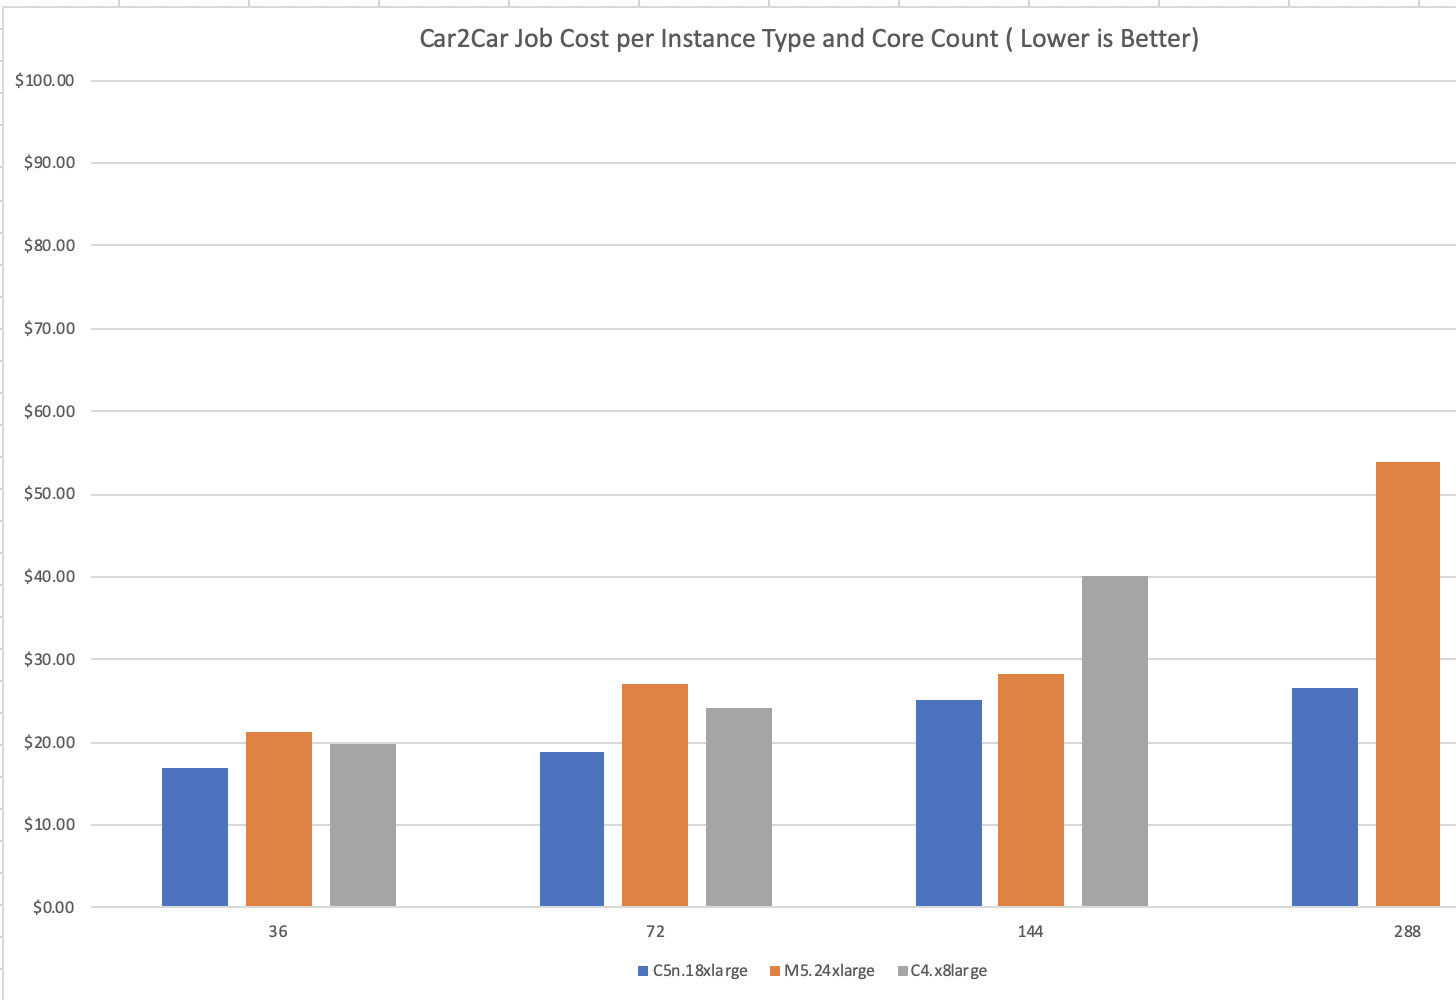 Comparing Car2Car Job Cost with EFA on AWS